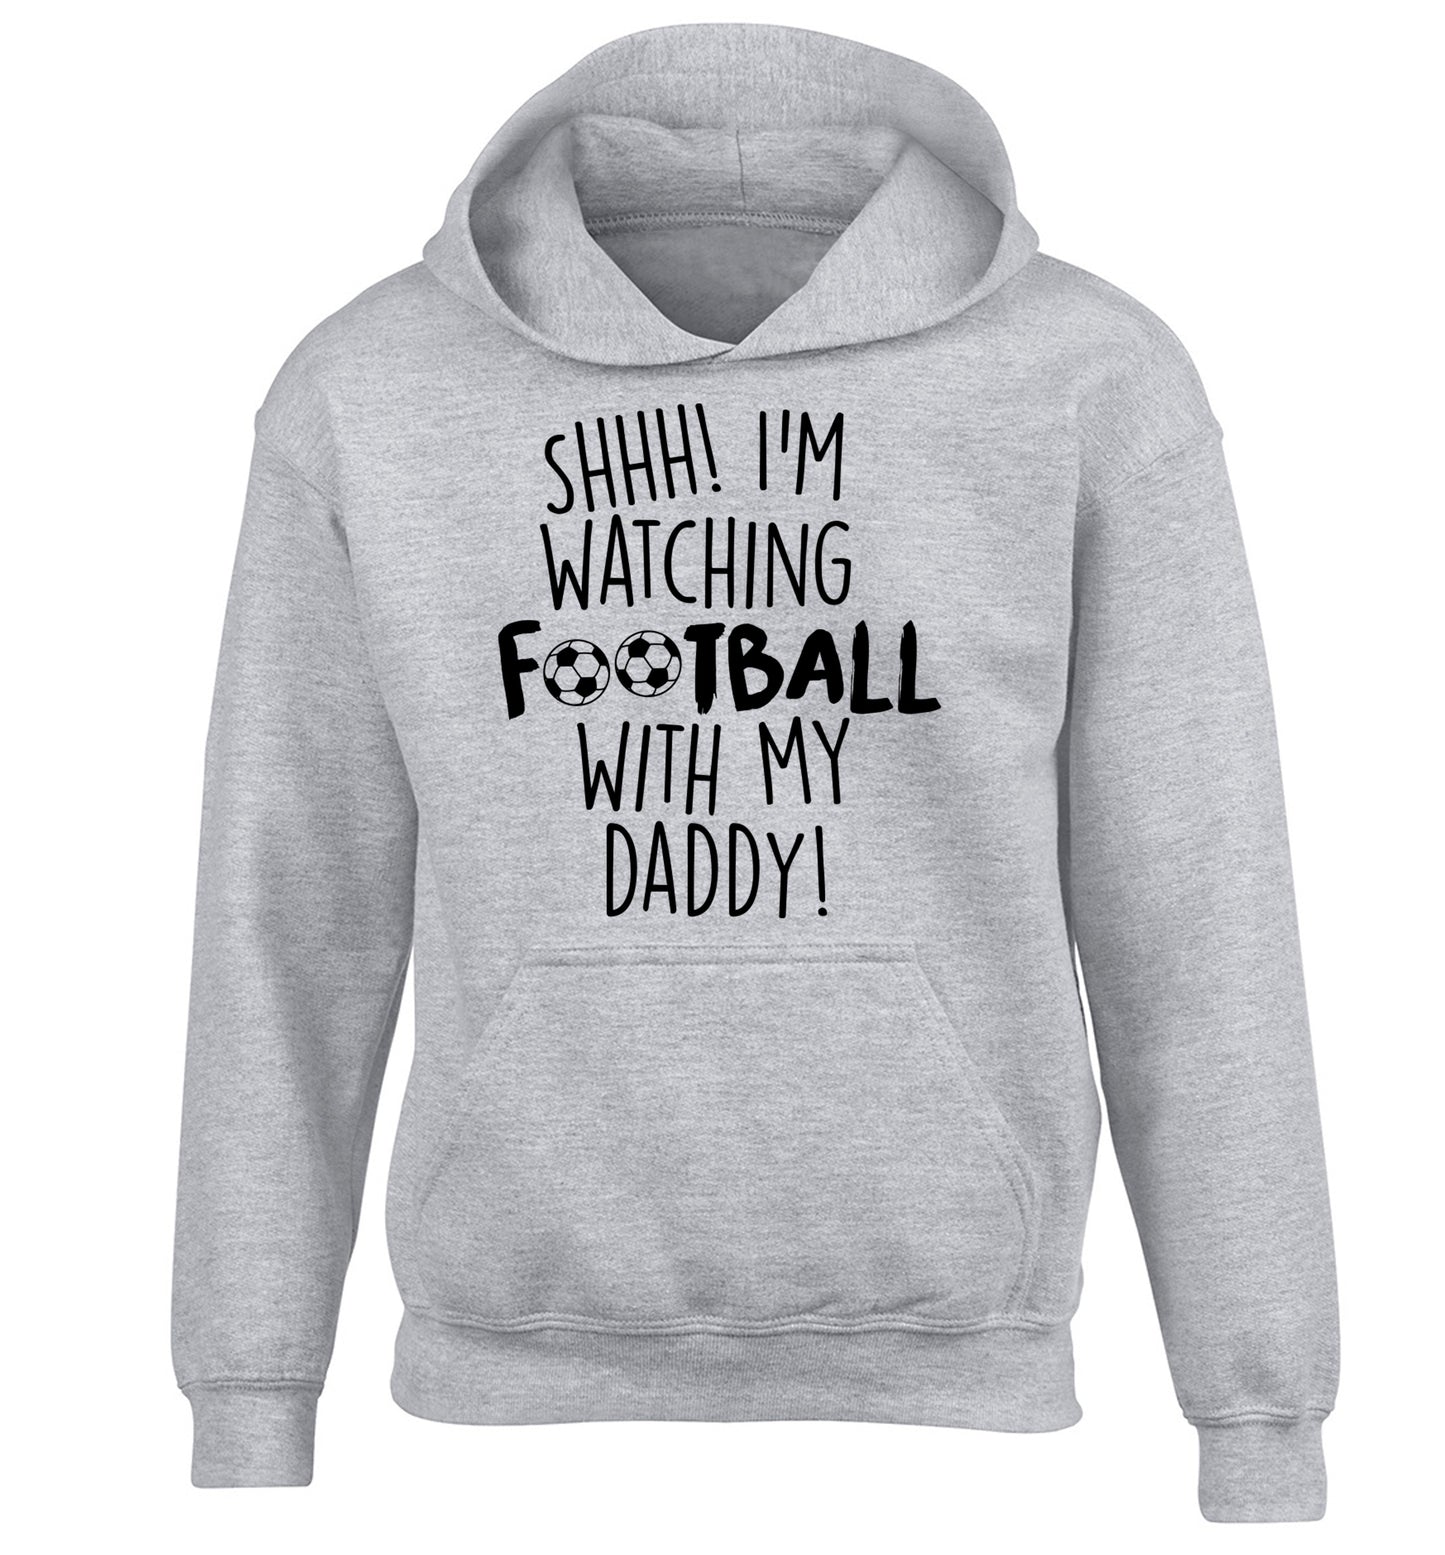 Shhh I'm watching football with my daddy children's grey hoodie 12-14 Years